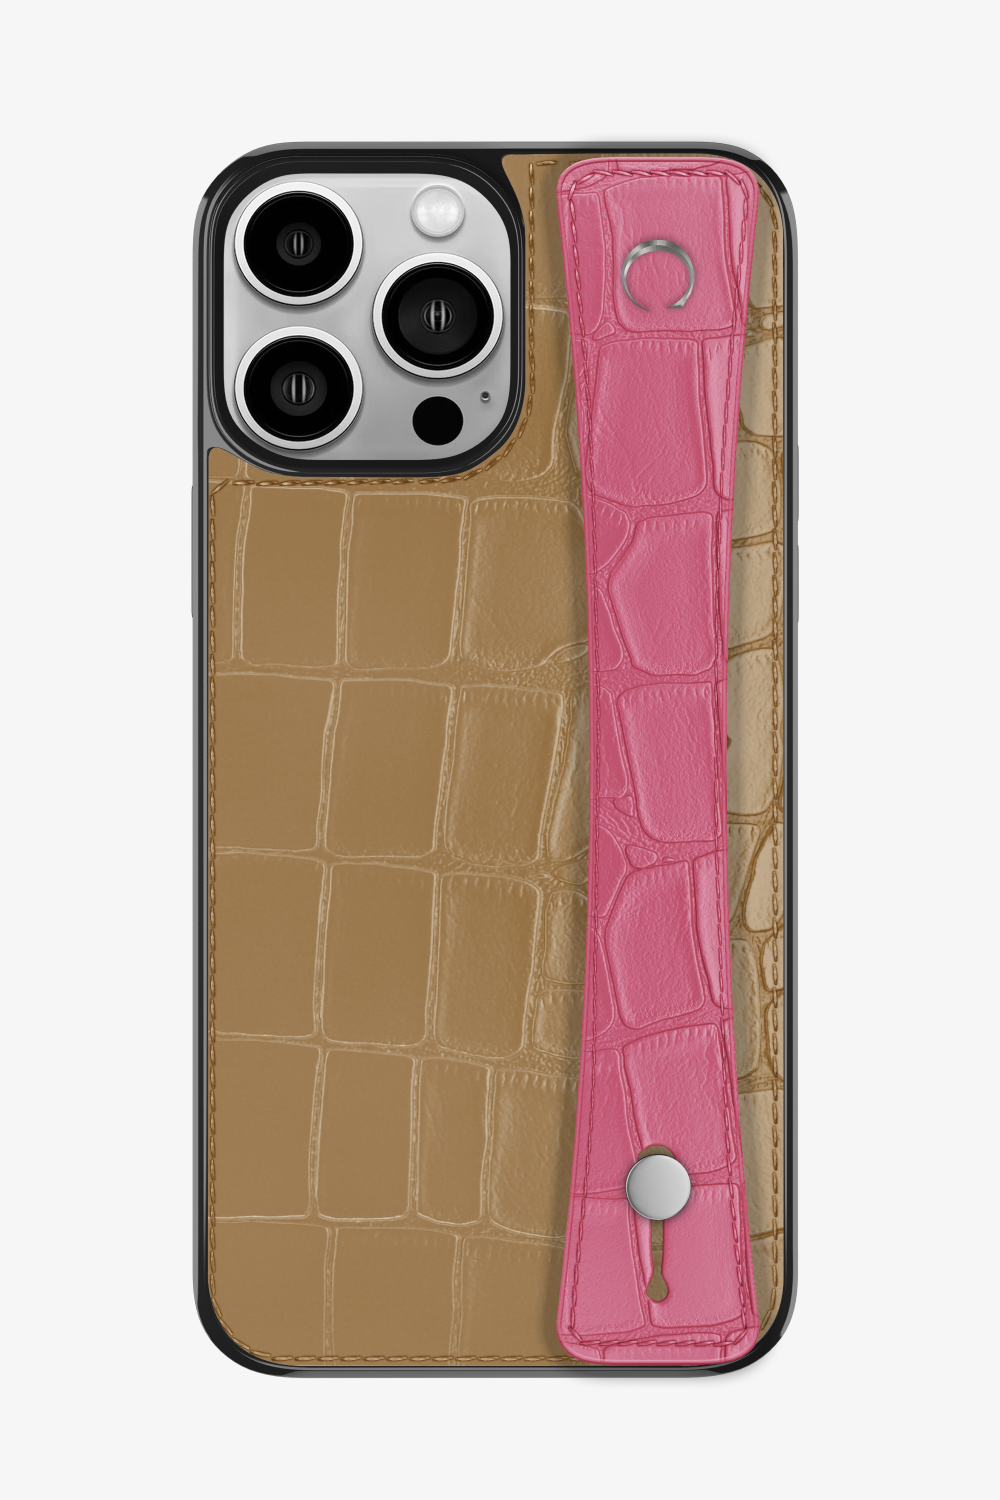 Alligator Sports Strap Case for iPhone 14 Pro Max - Latte / Pink - zollofrance